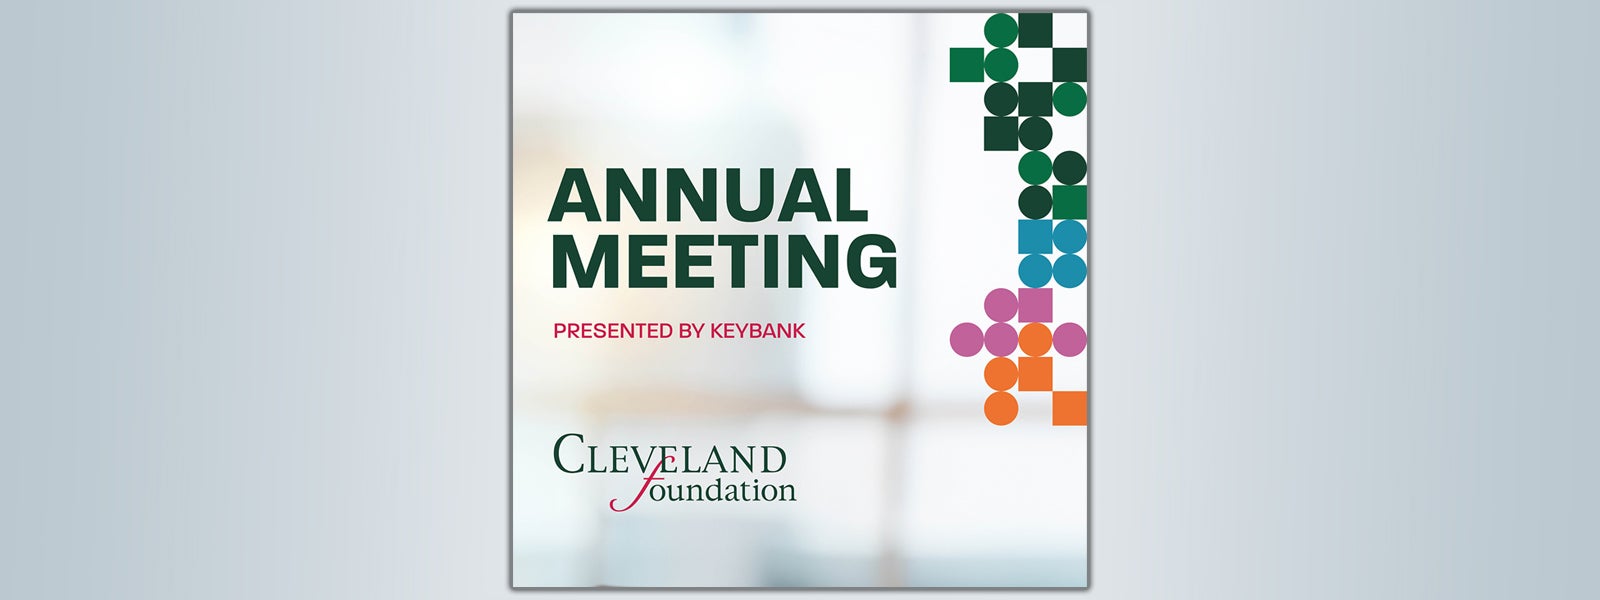 Cleveland Foundation Annual Meeting